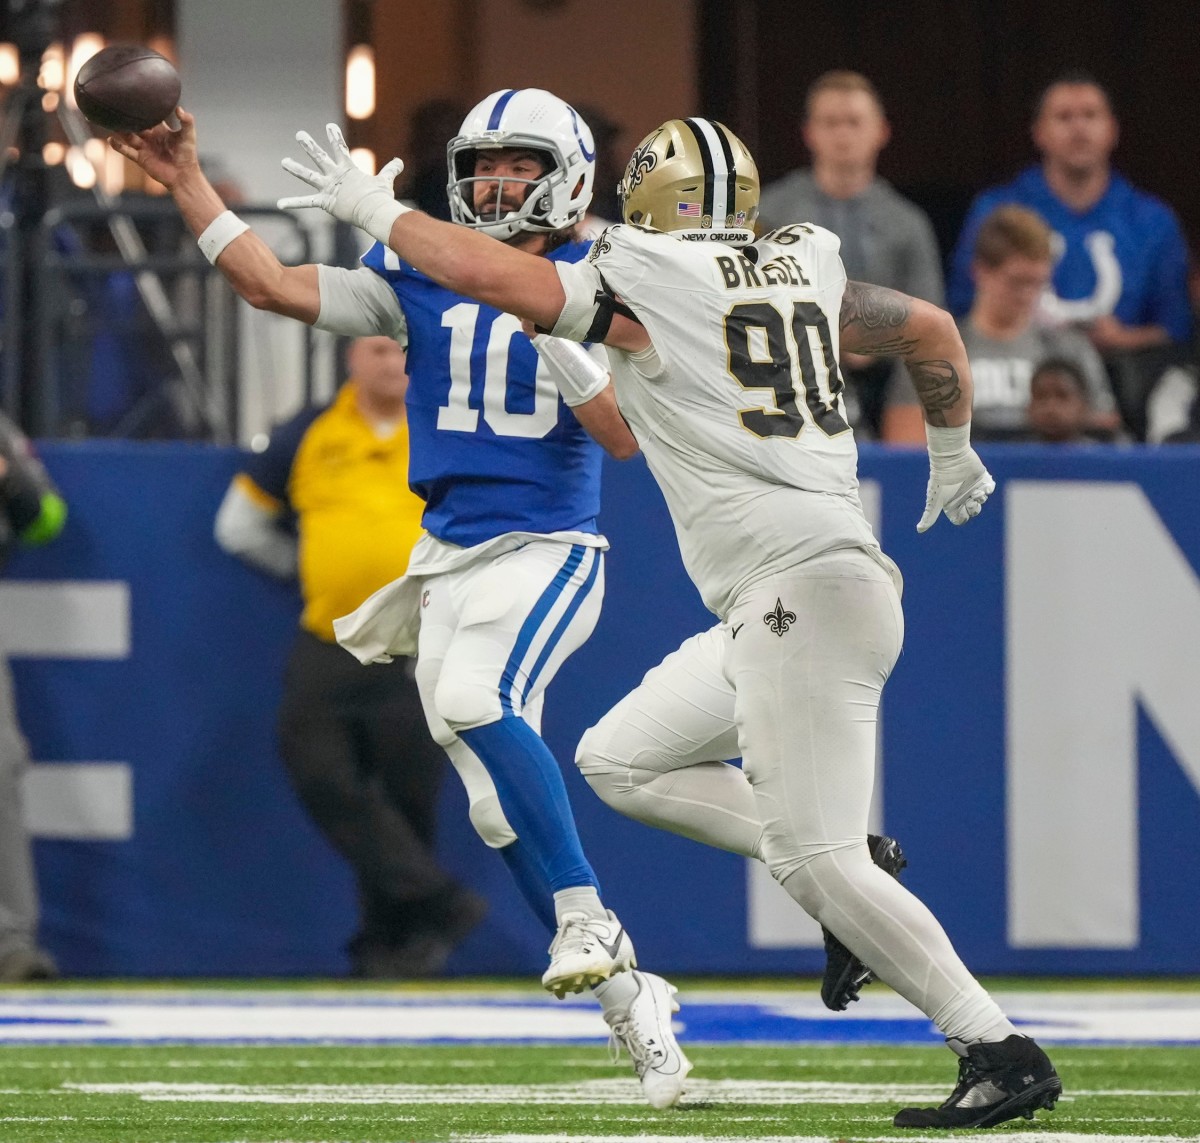 Indianapolis Colts quarterback Gardner Minshew II (10) throws under pressure from New Orleans Saints defensive tackle Bryan Bresee (90). © Robert Scheer/IndyStar / USA TODAY NETWORK